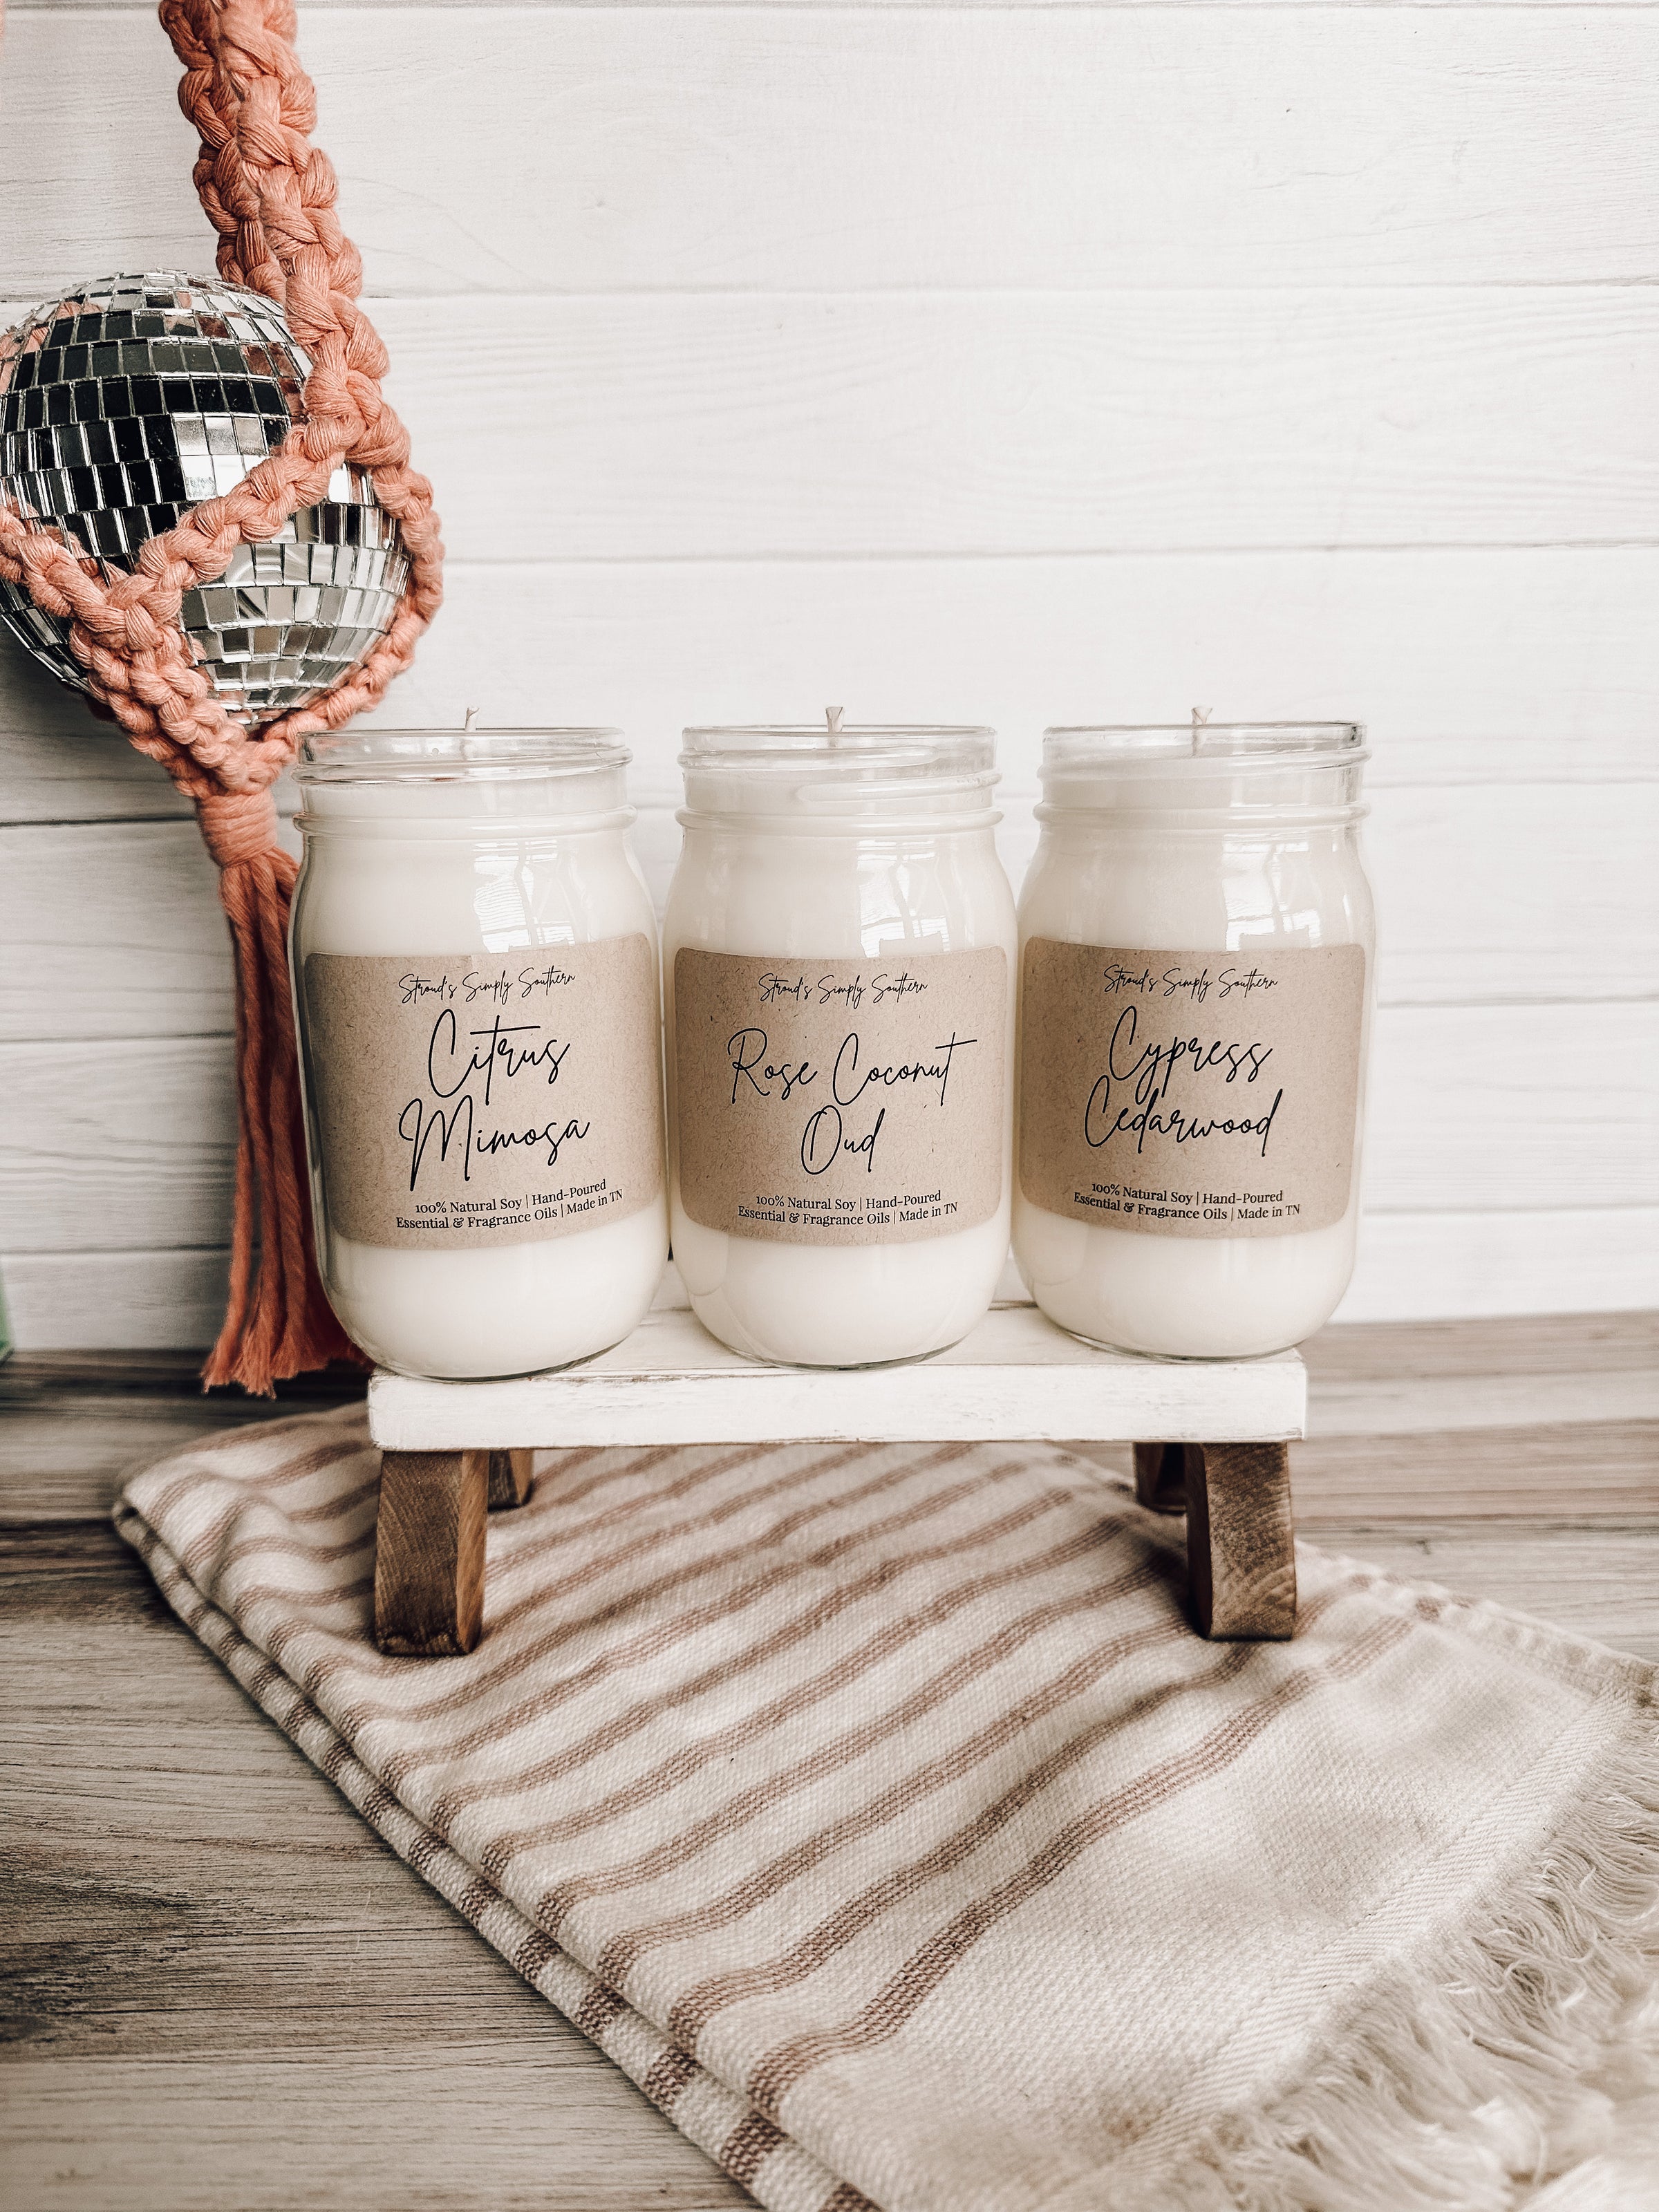 Soy Candle Refill Kit for 16oz Mason Jar Candles – stroudsimplysouthernco